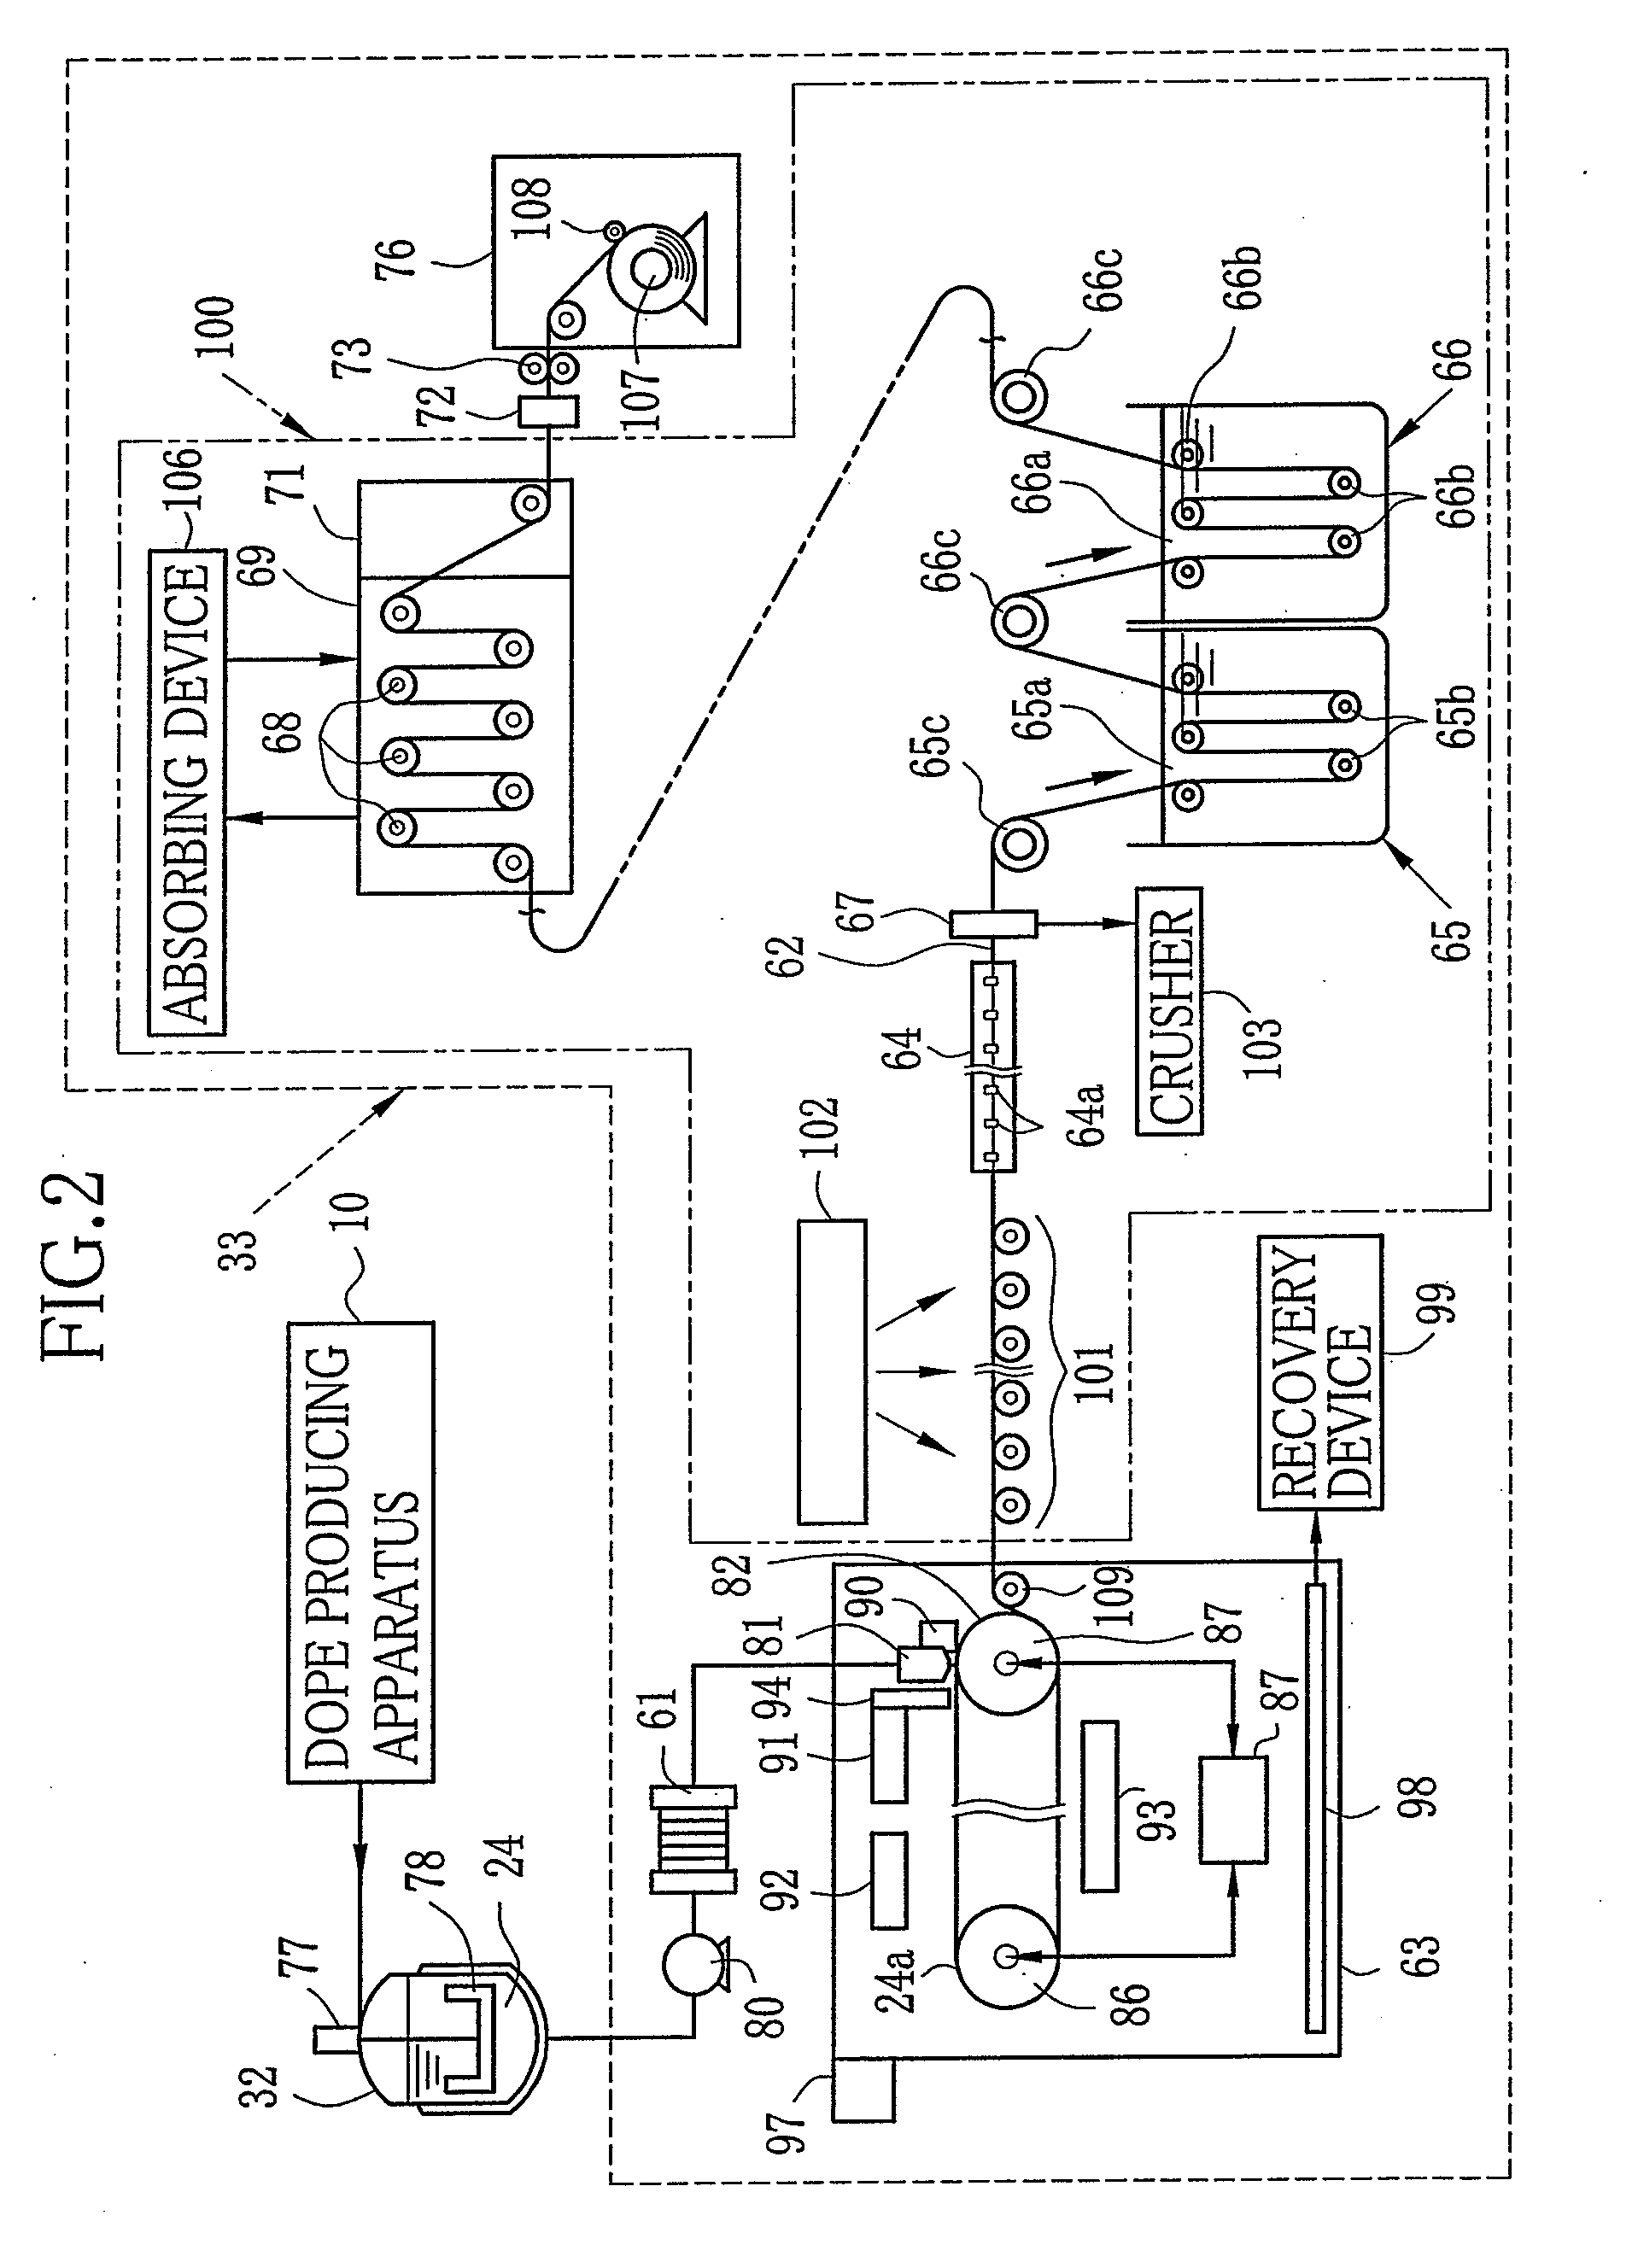 Solid electrolyte multilayer membrane, method and apparatus for producing the same, membrane electrode assembly, and fuel cell